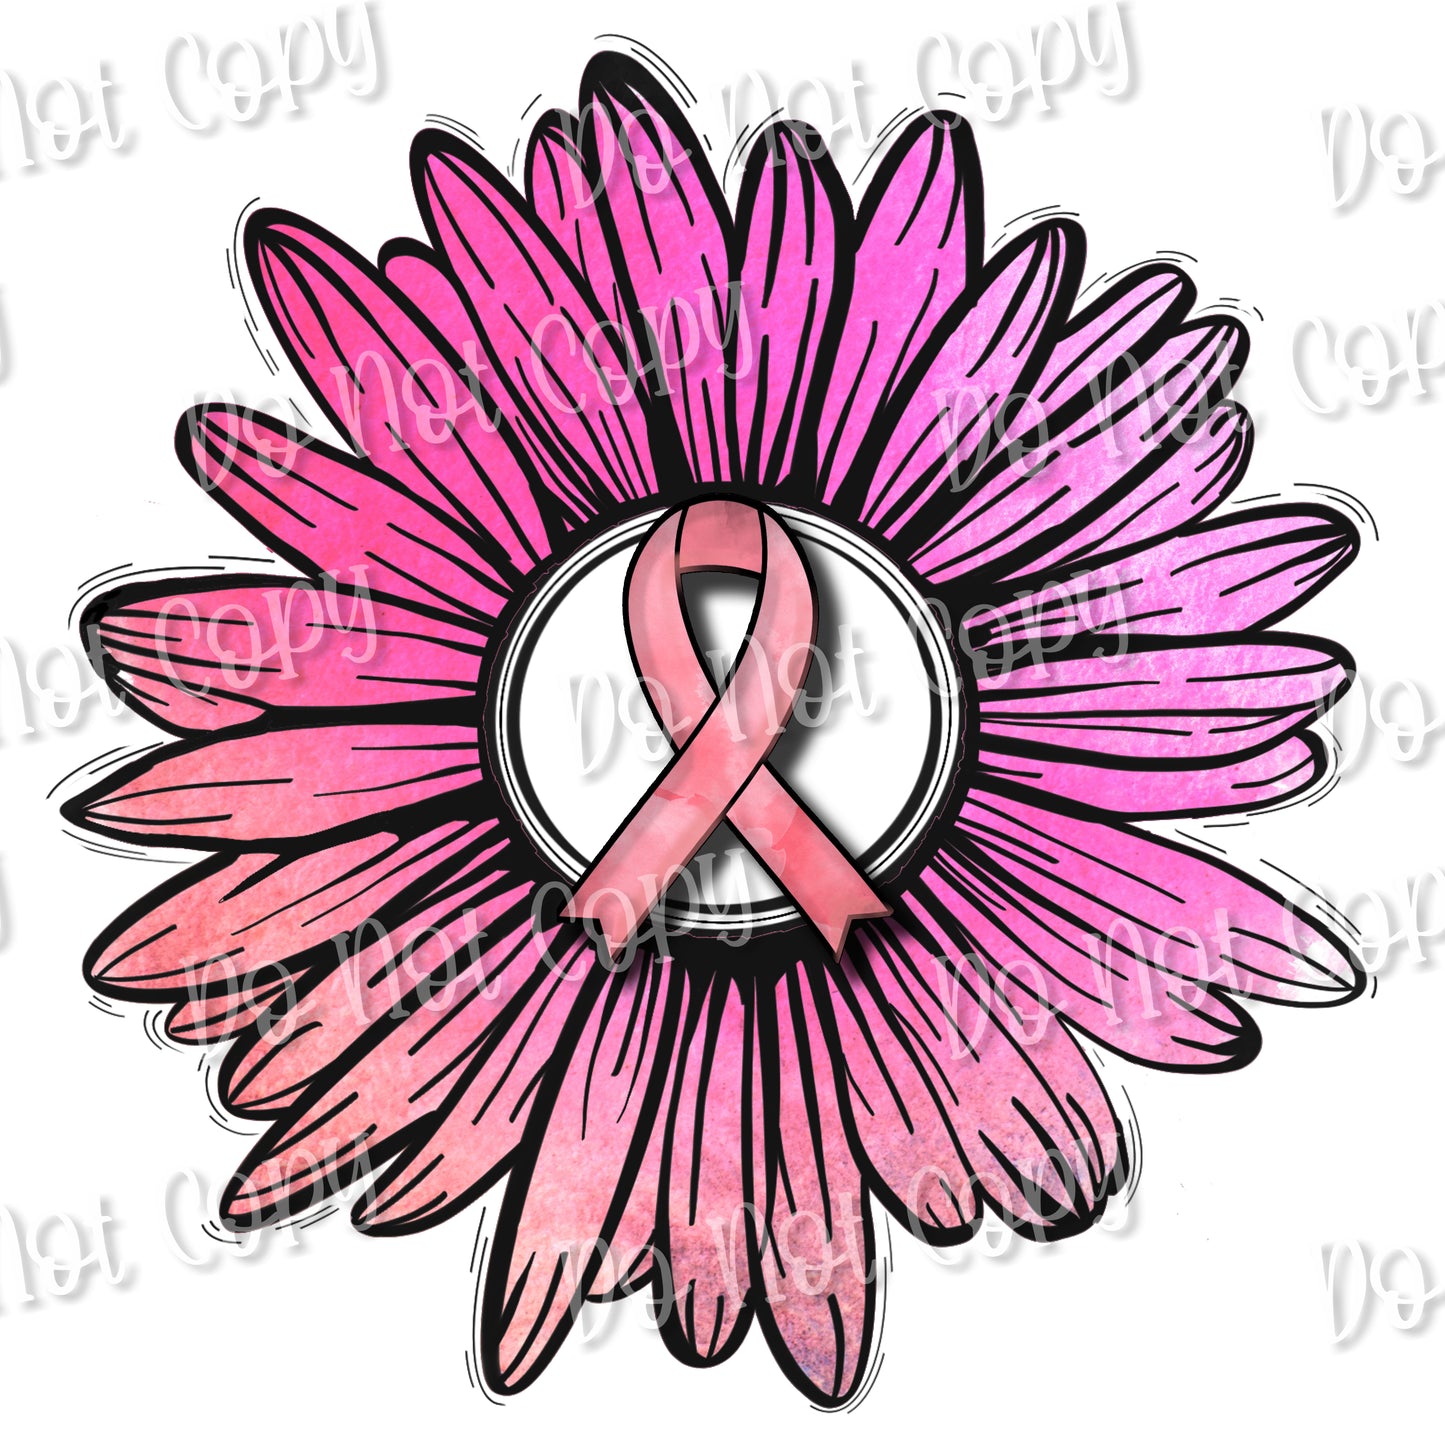 Breast Cancer Awareness flower/ribbon sublimation